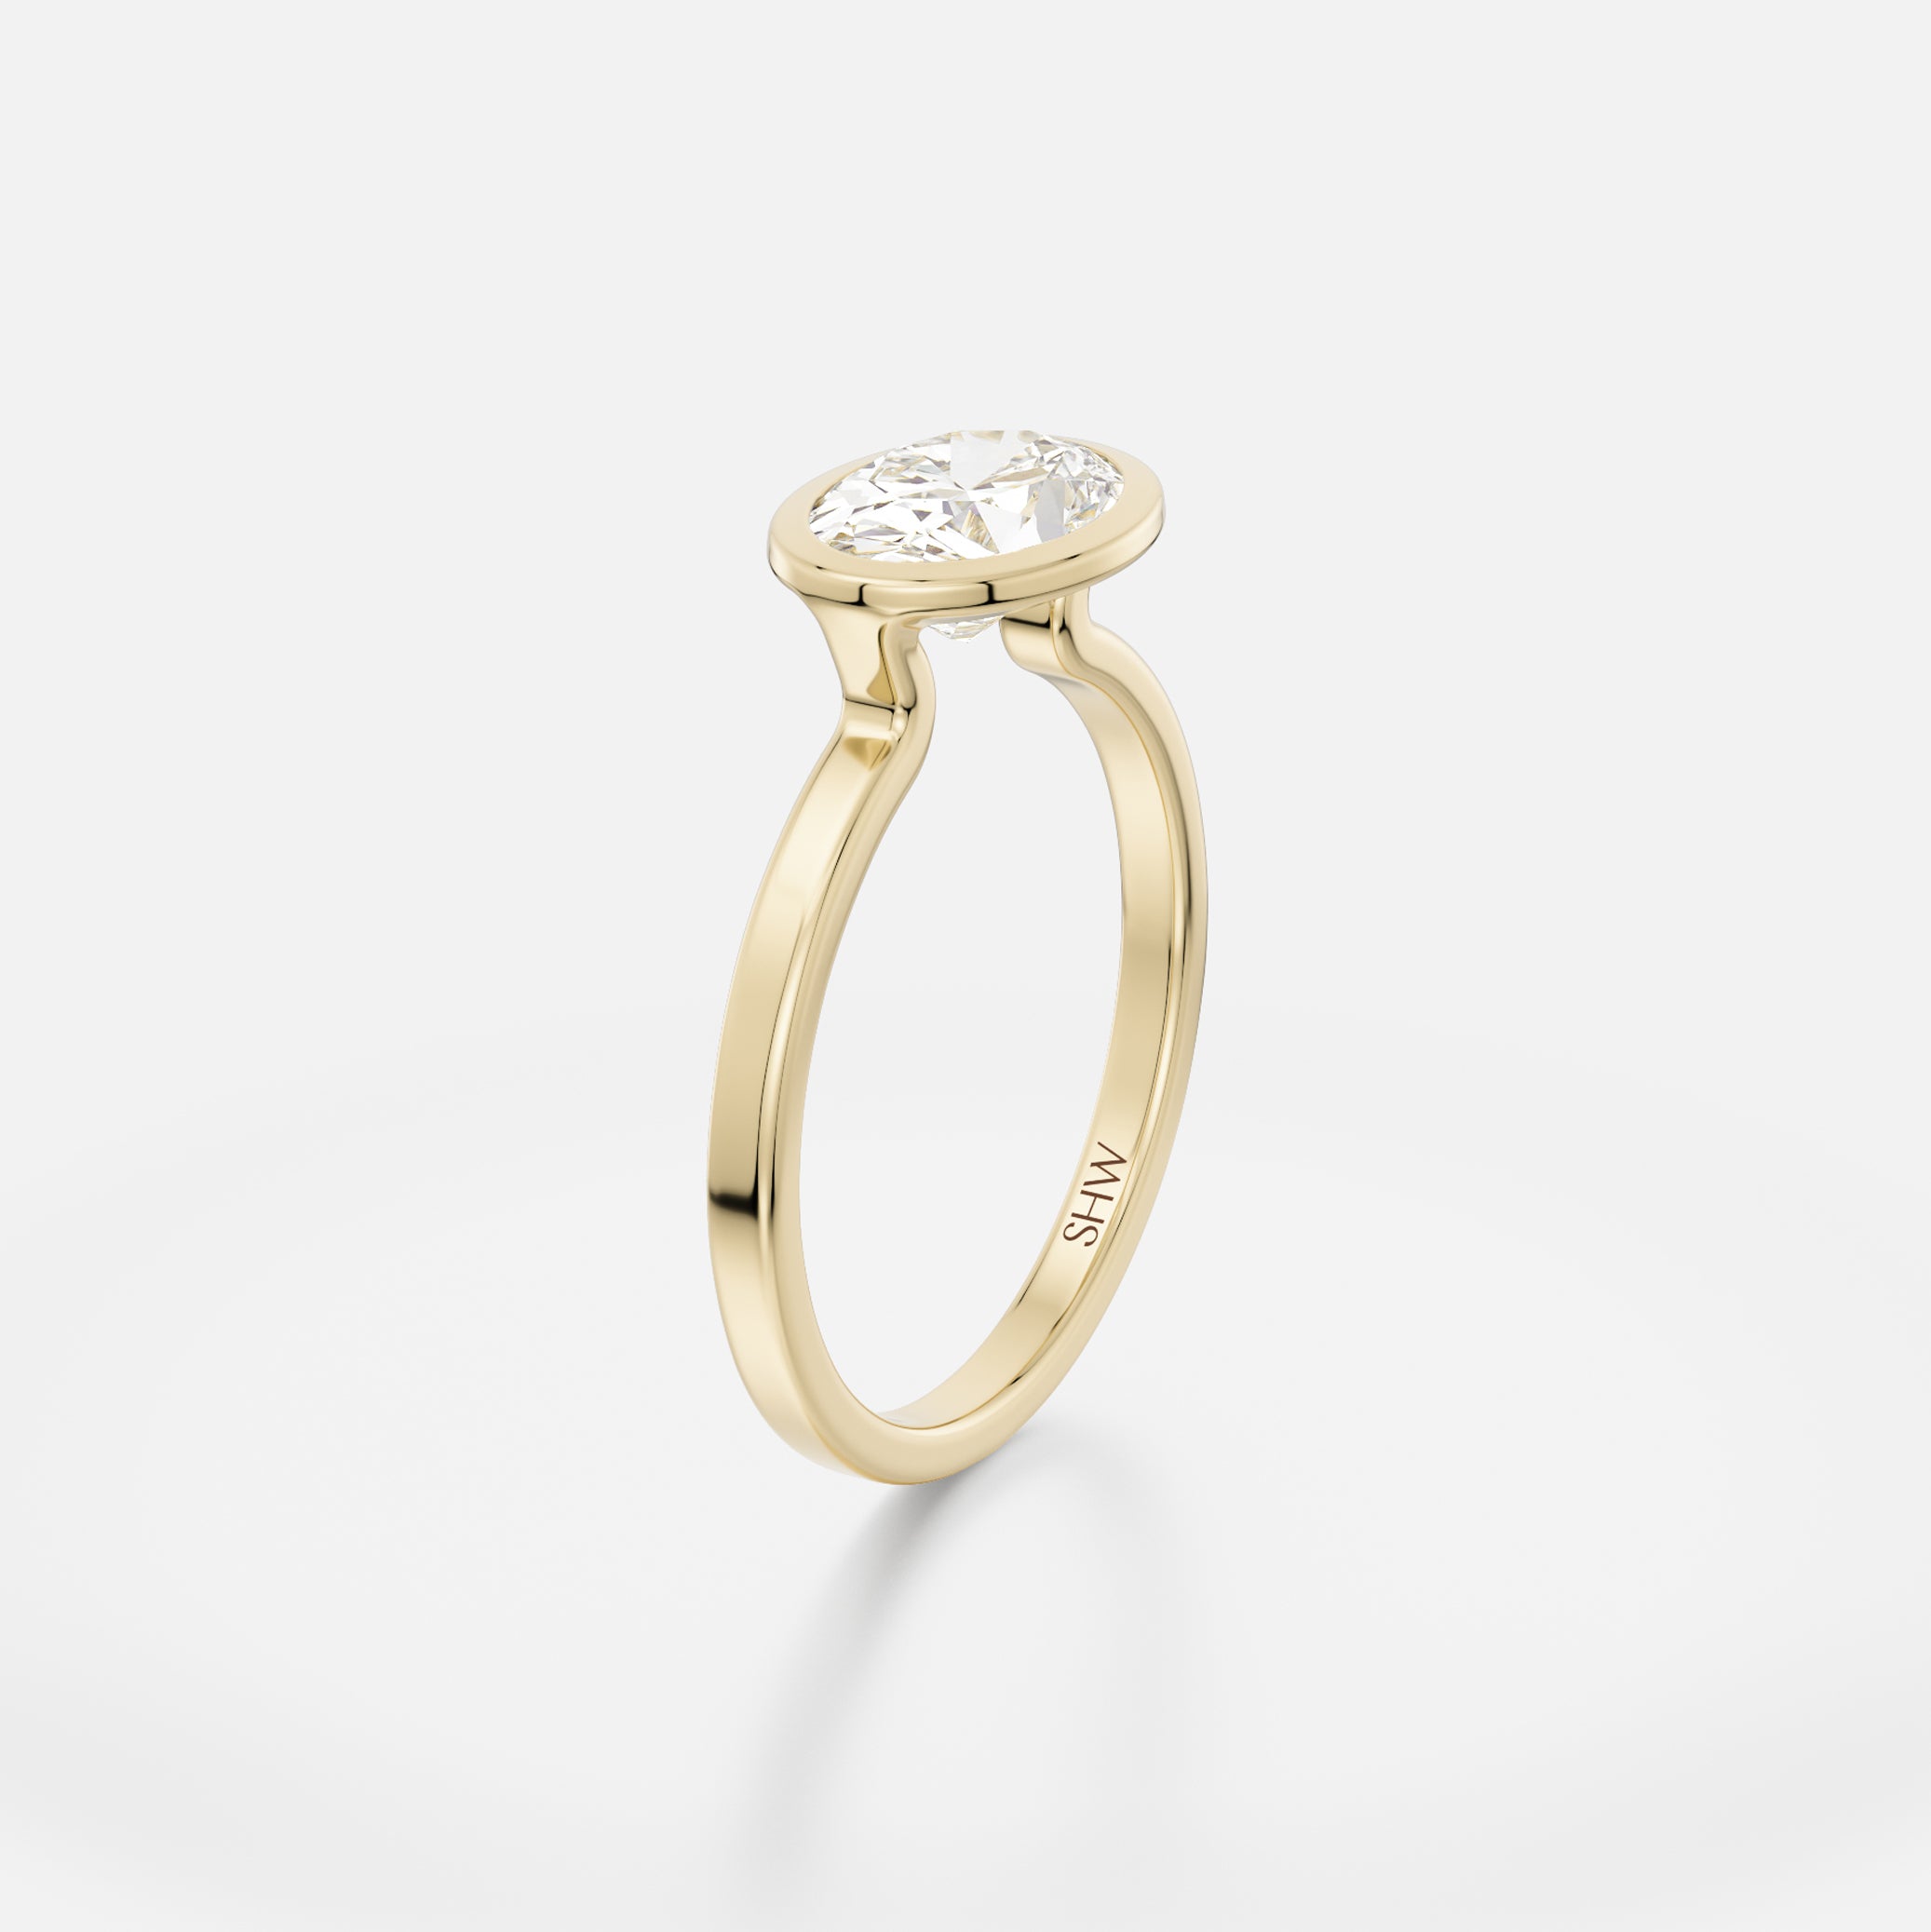 Mana with Square Profile with East West Oval Minimalist Engagement Ring Setting handcrafted by SHW Fine Jewelry NYC